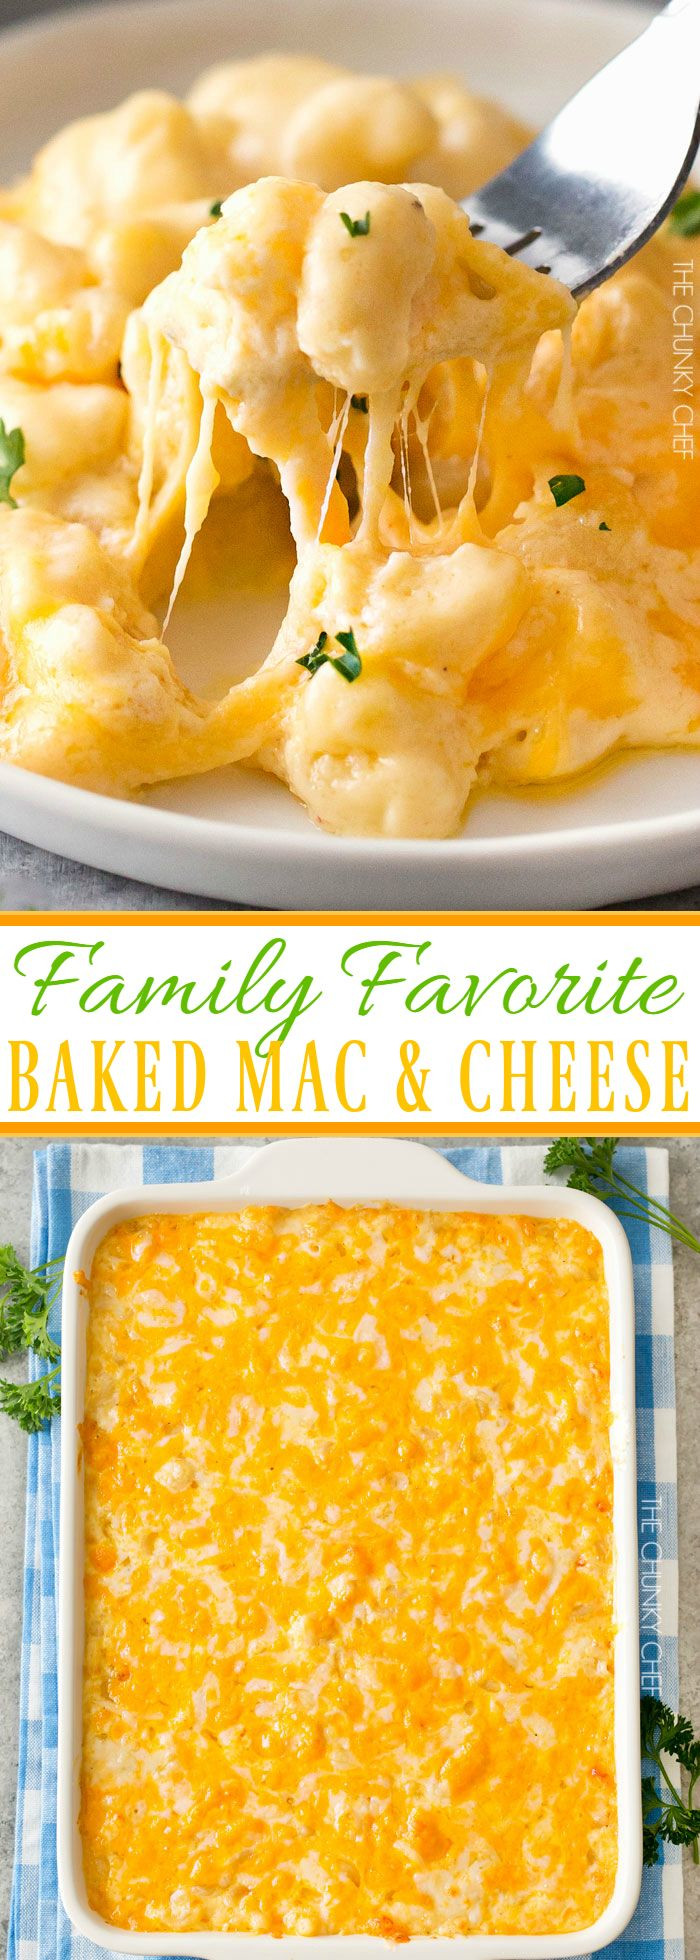 Baked Macaroni And Cheese With Heavy Cream
 Creamy Homemade Baked Mac and Cheese Recipe